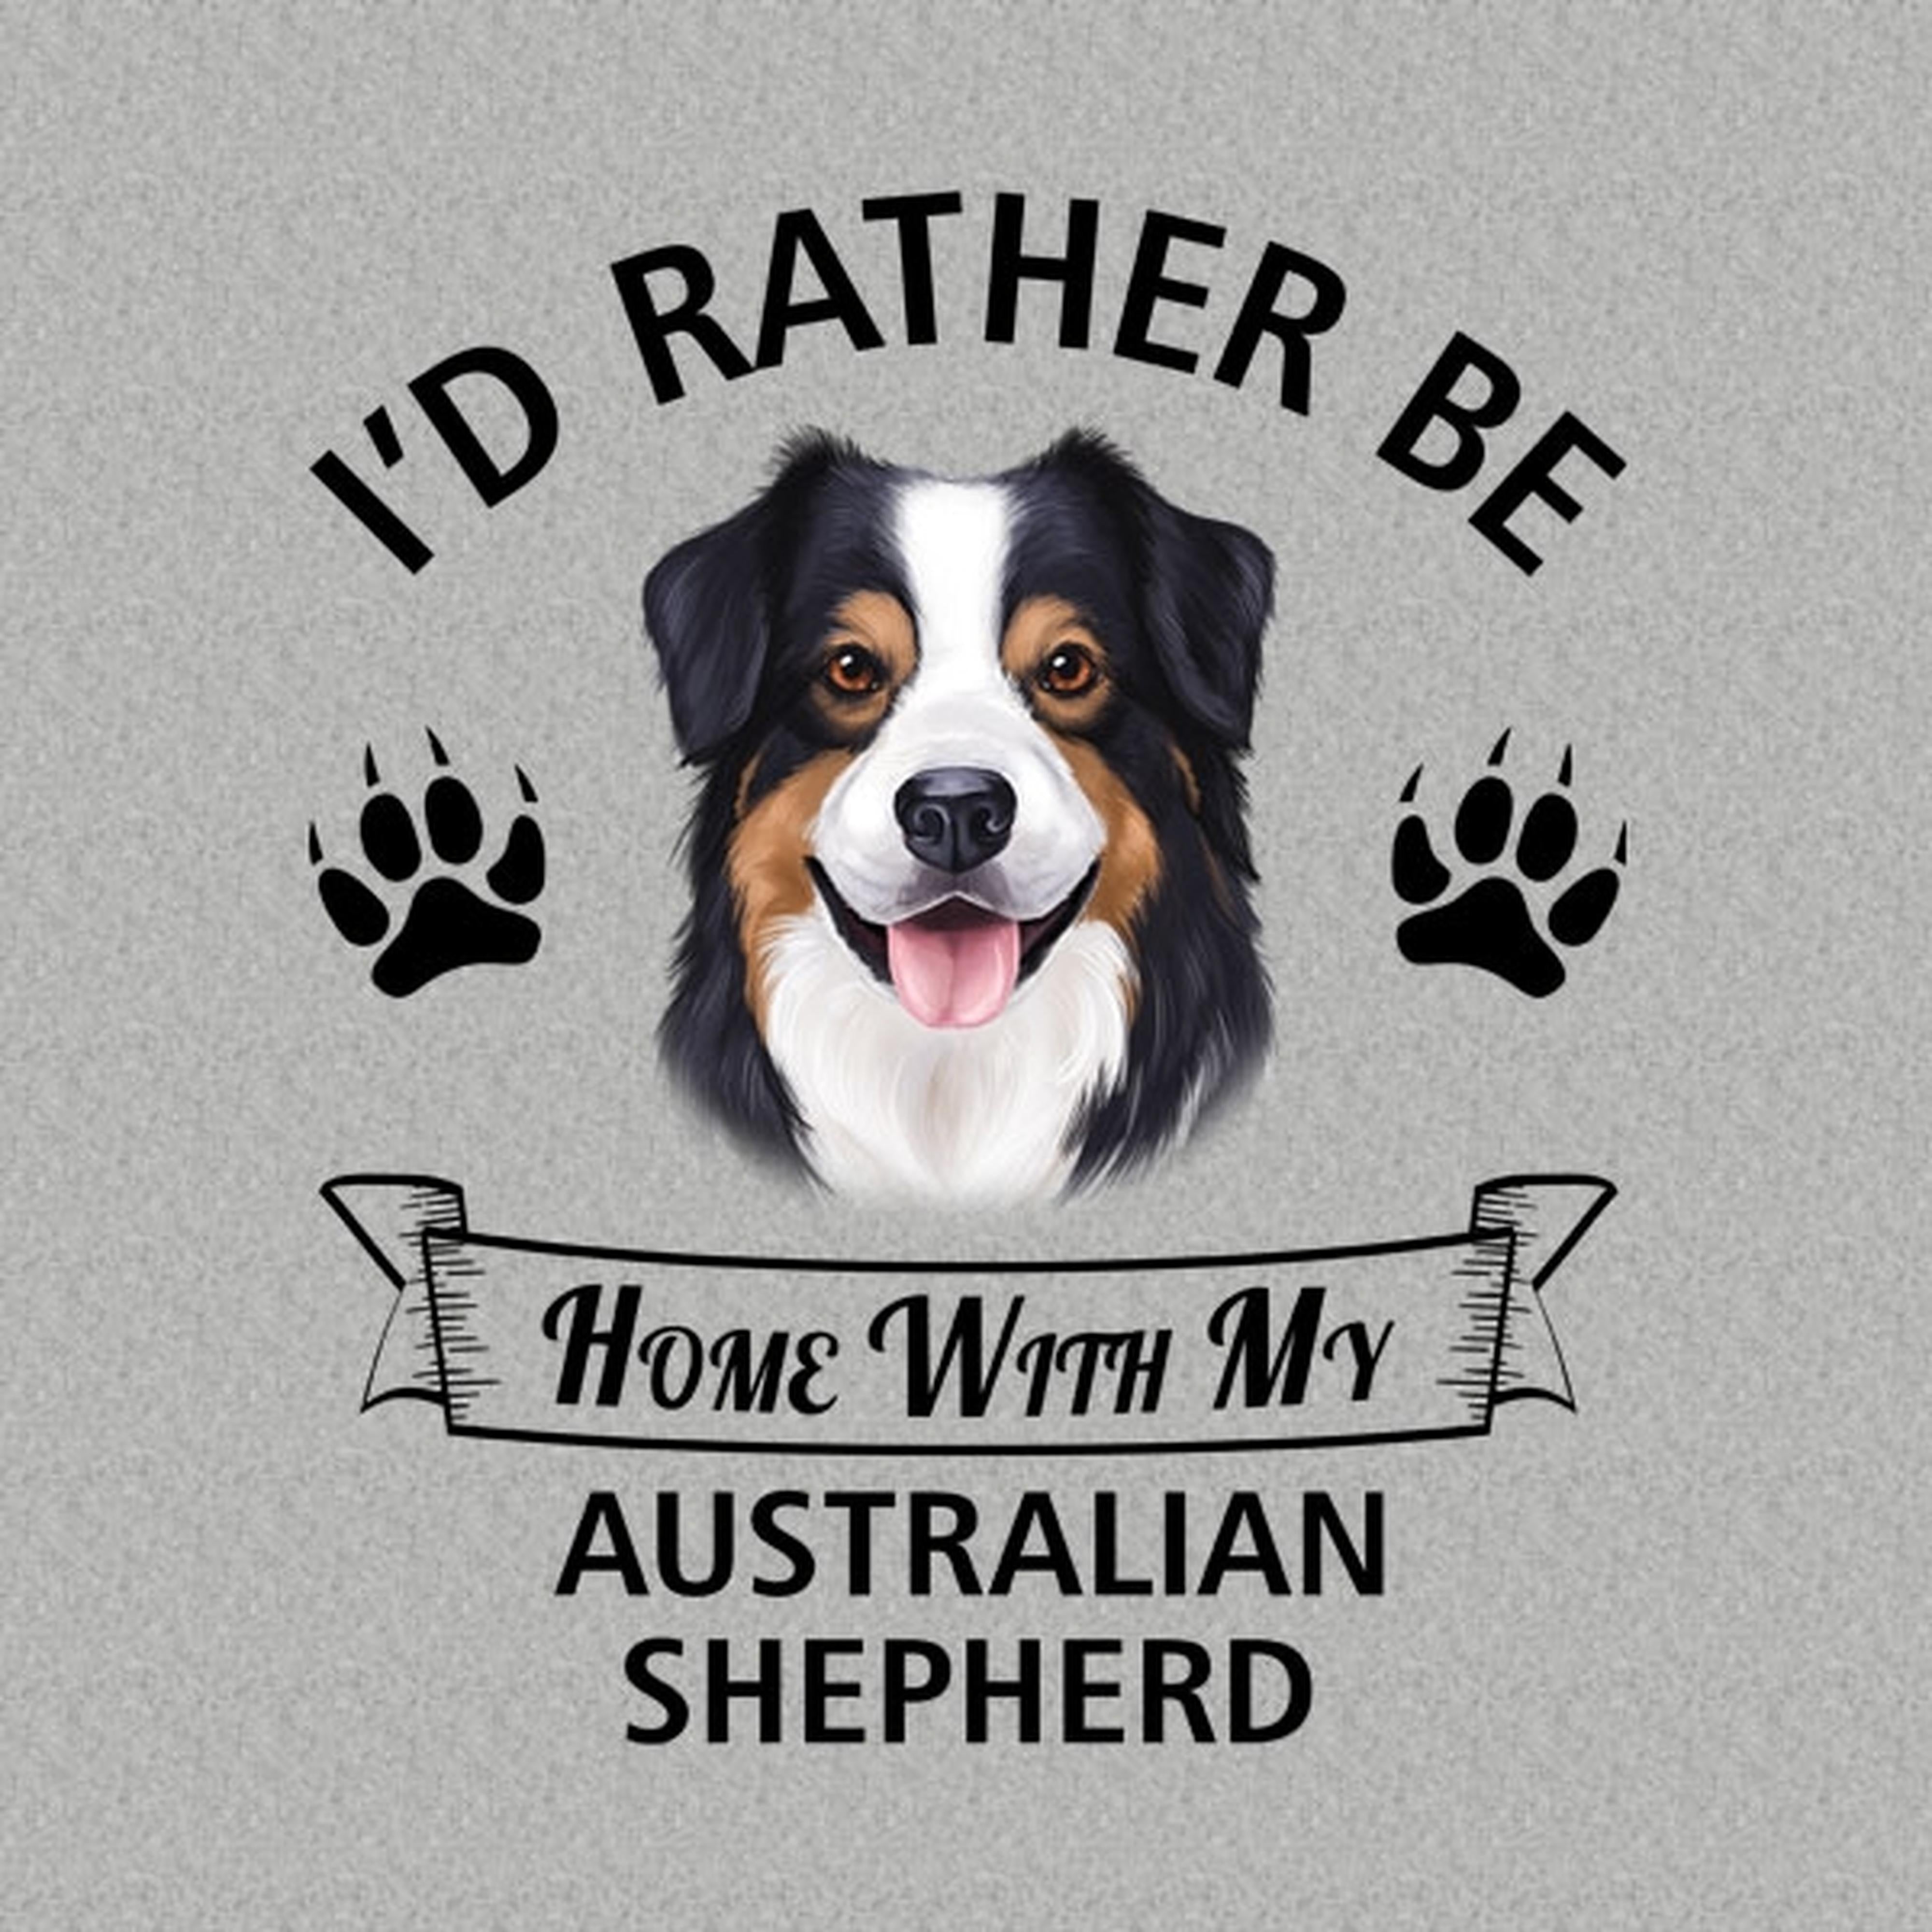 I'd rather stay home with my Australian Shepherd - T-shirt